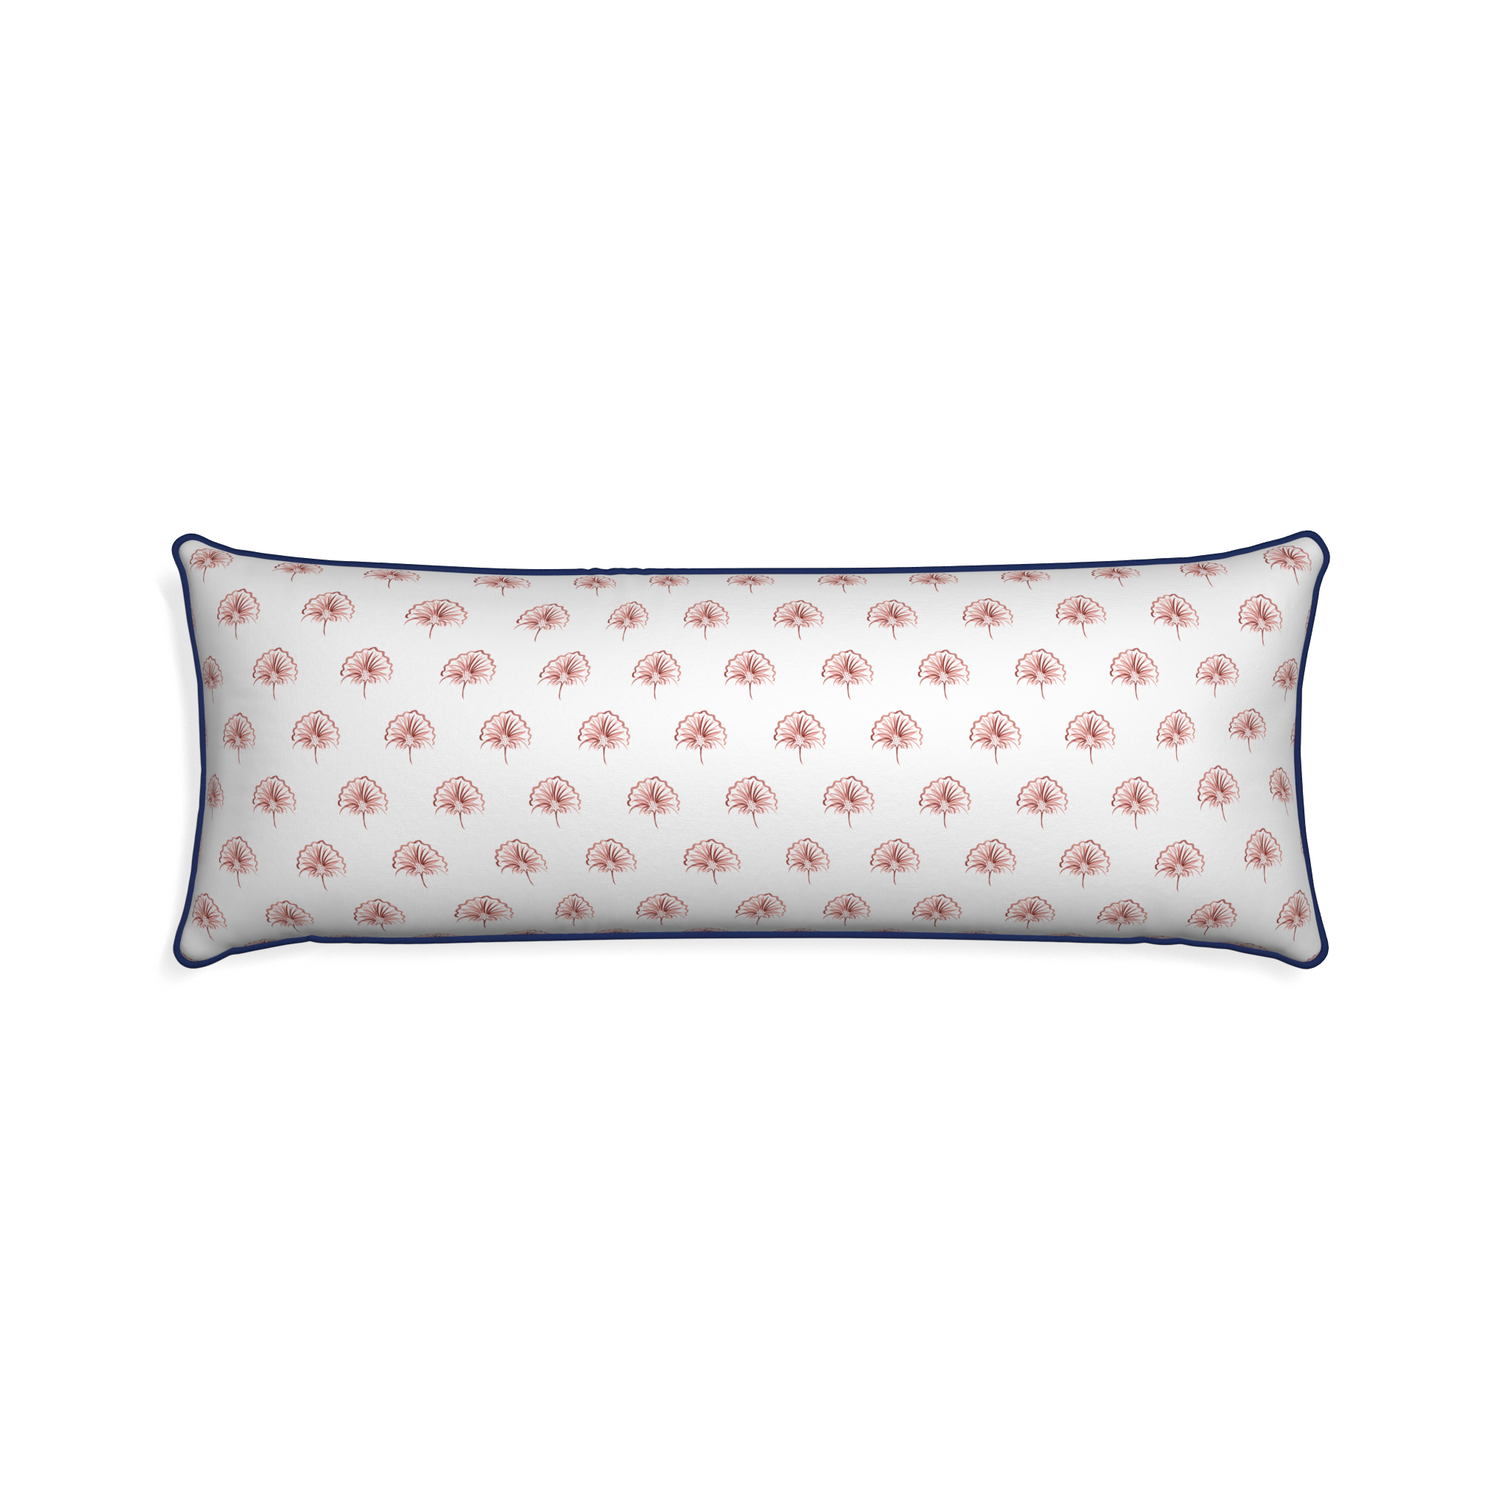 Xl-lumbar penelope rose custom pillow with midnight piping on white background